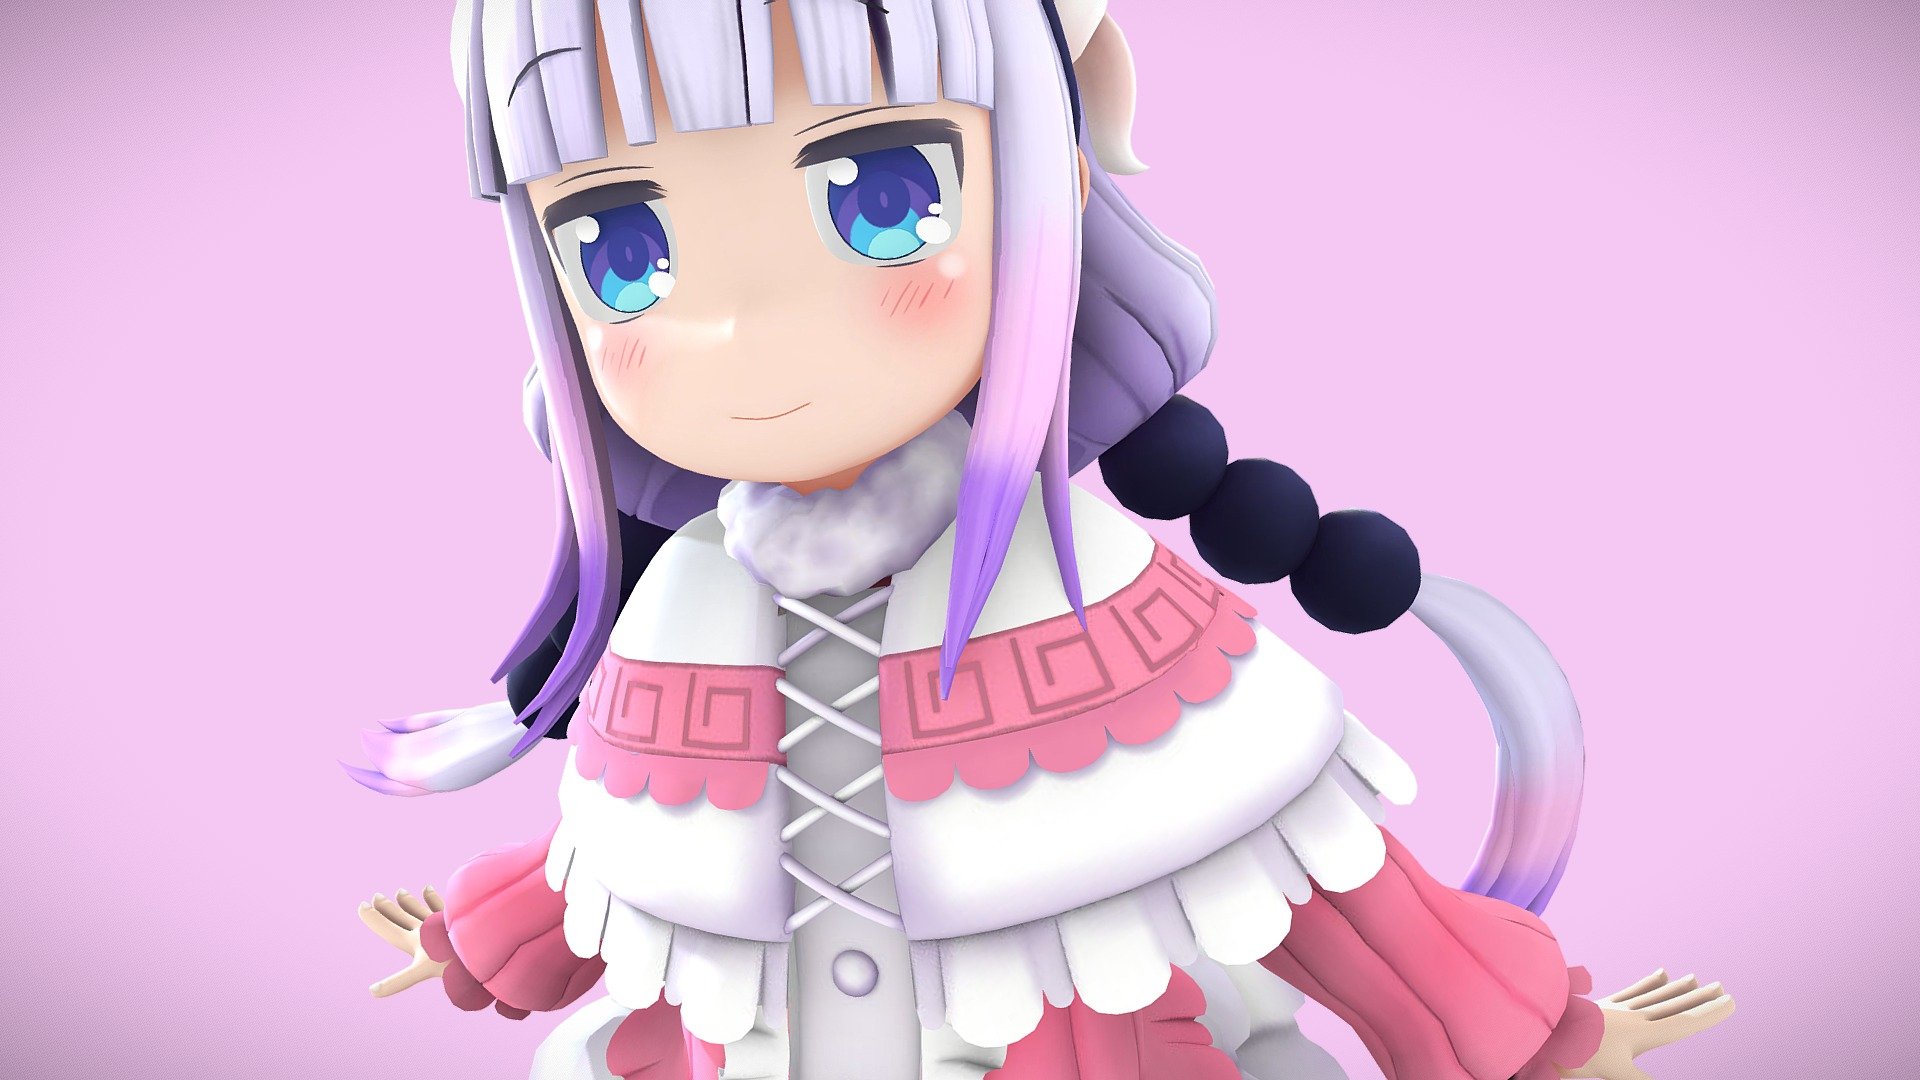 Kanna ~ 
One of my favorited characters!

She is innocent and adorable, 
I follow a Modeling video to created this model and learned some new things, the result looks good, I am so happy about it!



康娜!!  可愛的蘿莉!!
我隨著大佬的建模影片跟著做, 其實這樣的衣服對我來說算複雜了&hellip;(太嫩了)
多少學了點新東西, 成品也不錯~還挺令人開心的!! - Kanna  (Miss Kobayashi's Dragon Maid) - 3D model by hwahaha418 3d model